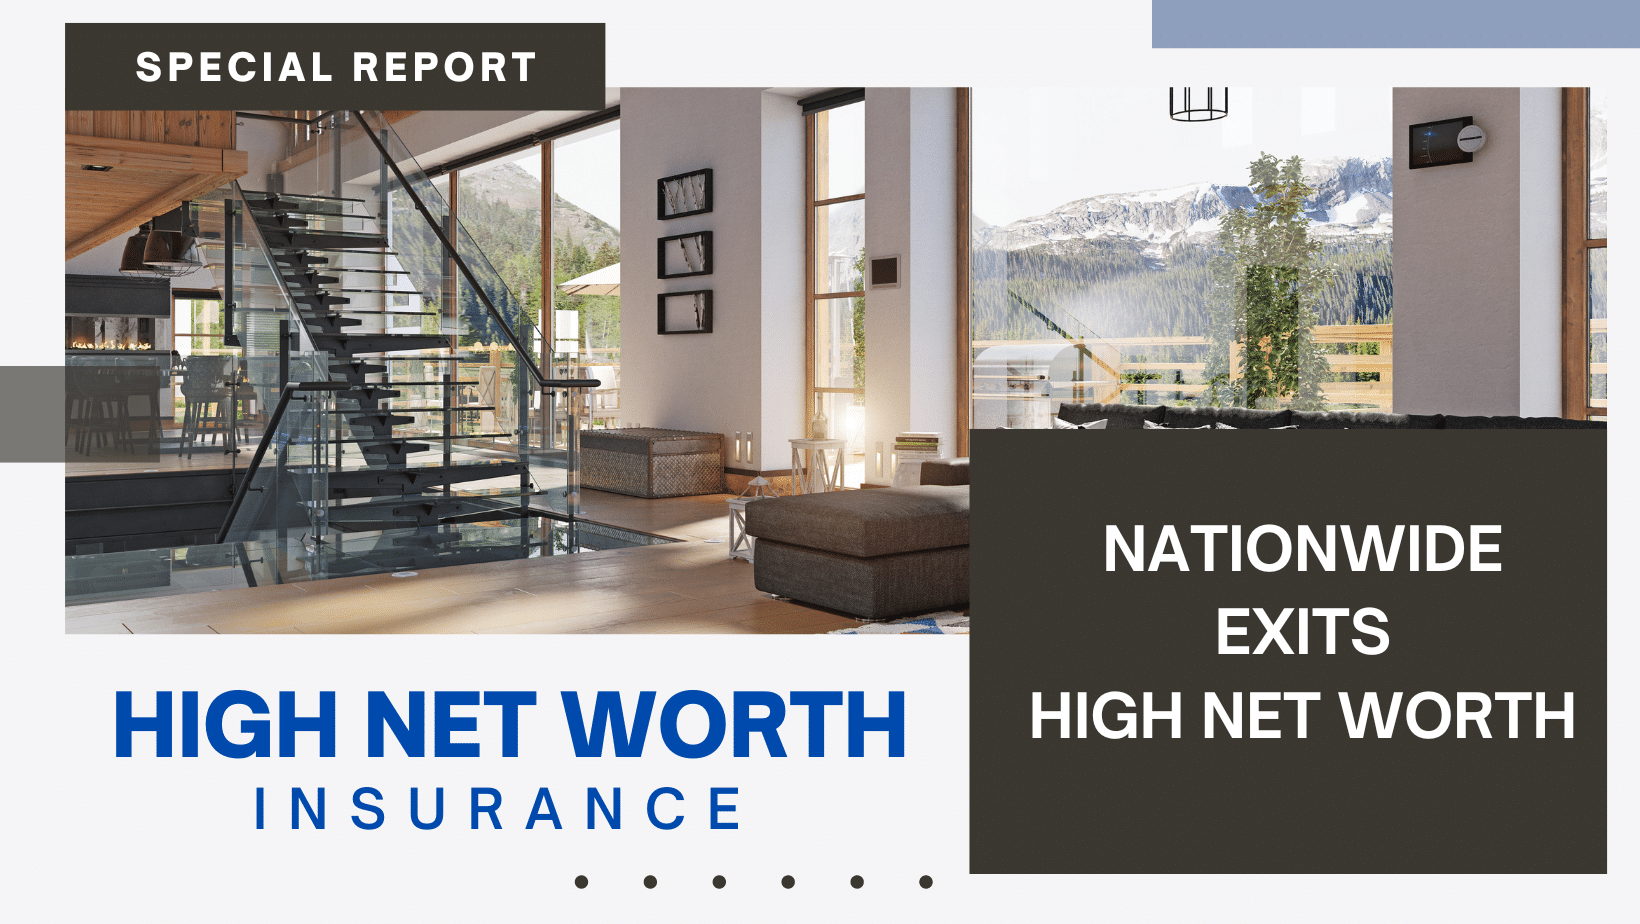 Interior of a luxury home with a modern glass staircase, representing high net worth insurance, with a special report banner indicating Nationwide's exit from this market.